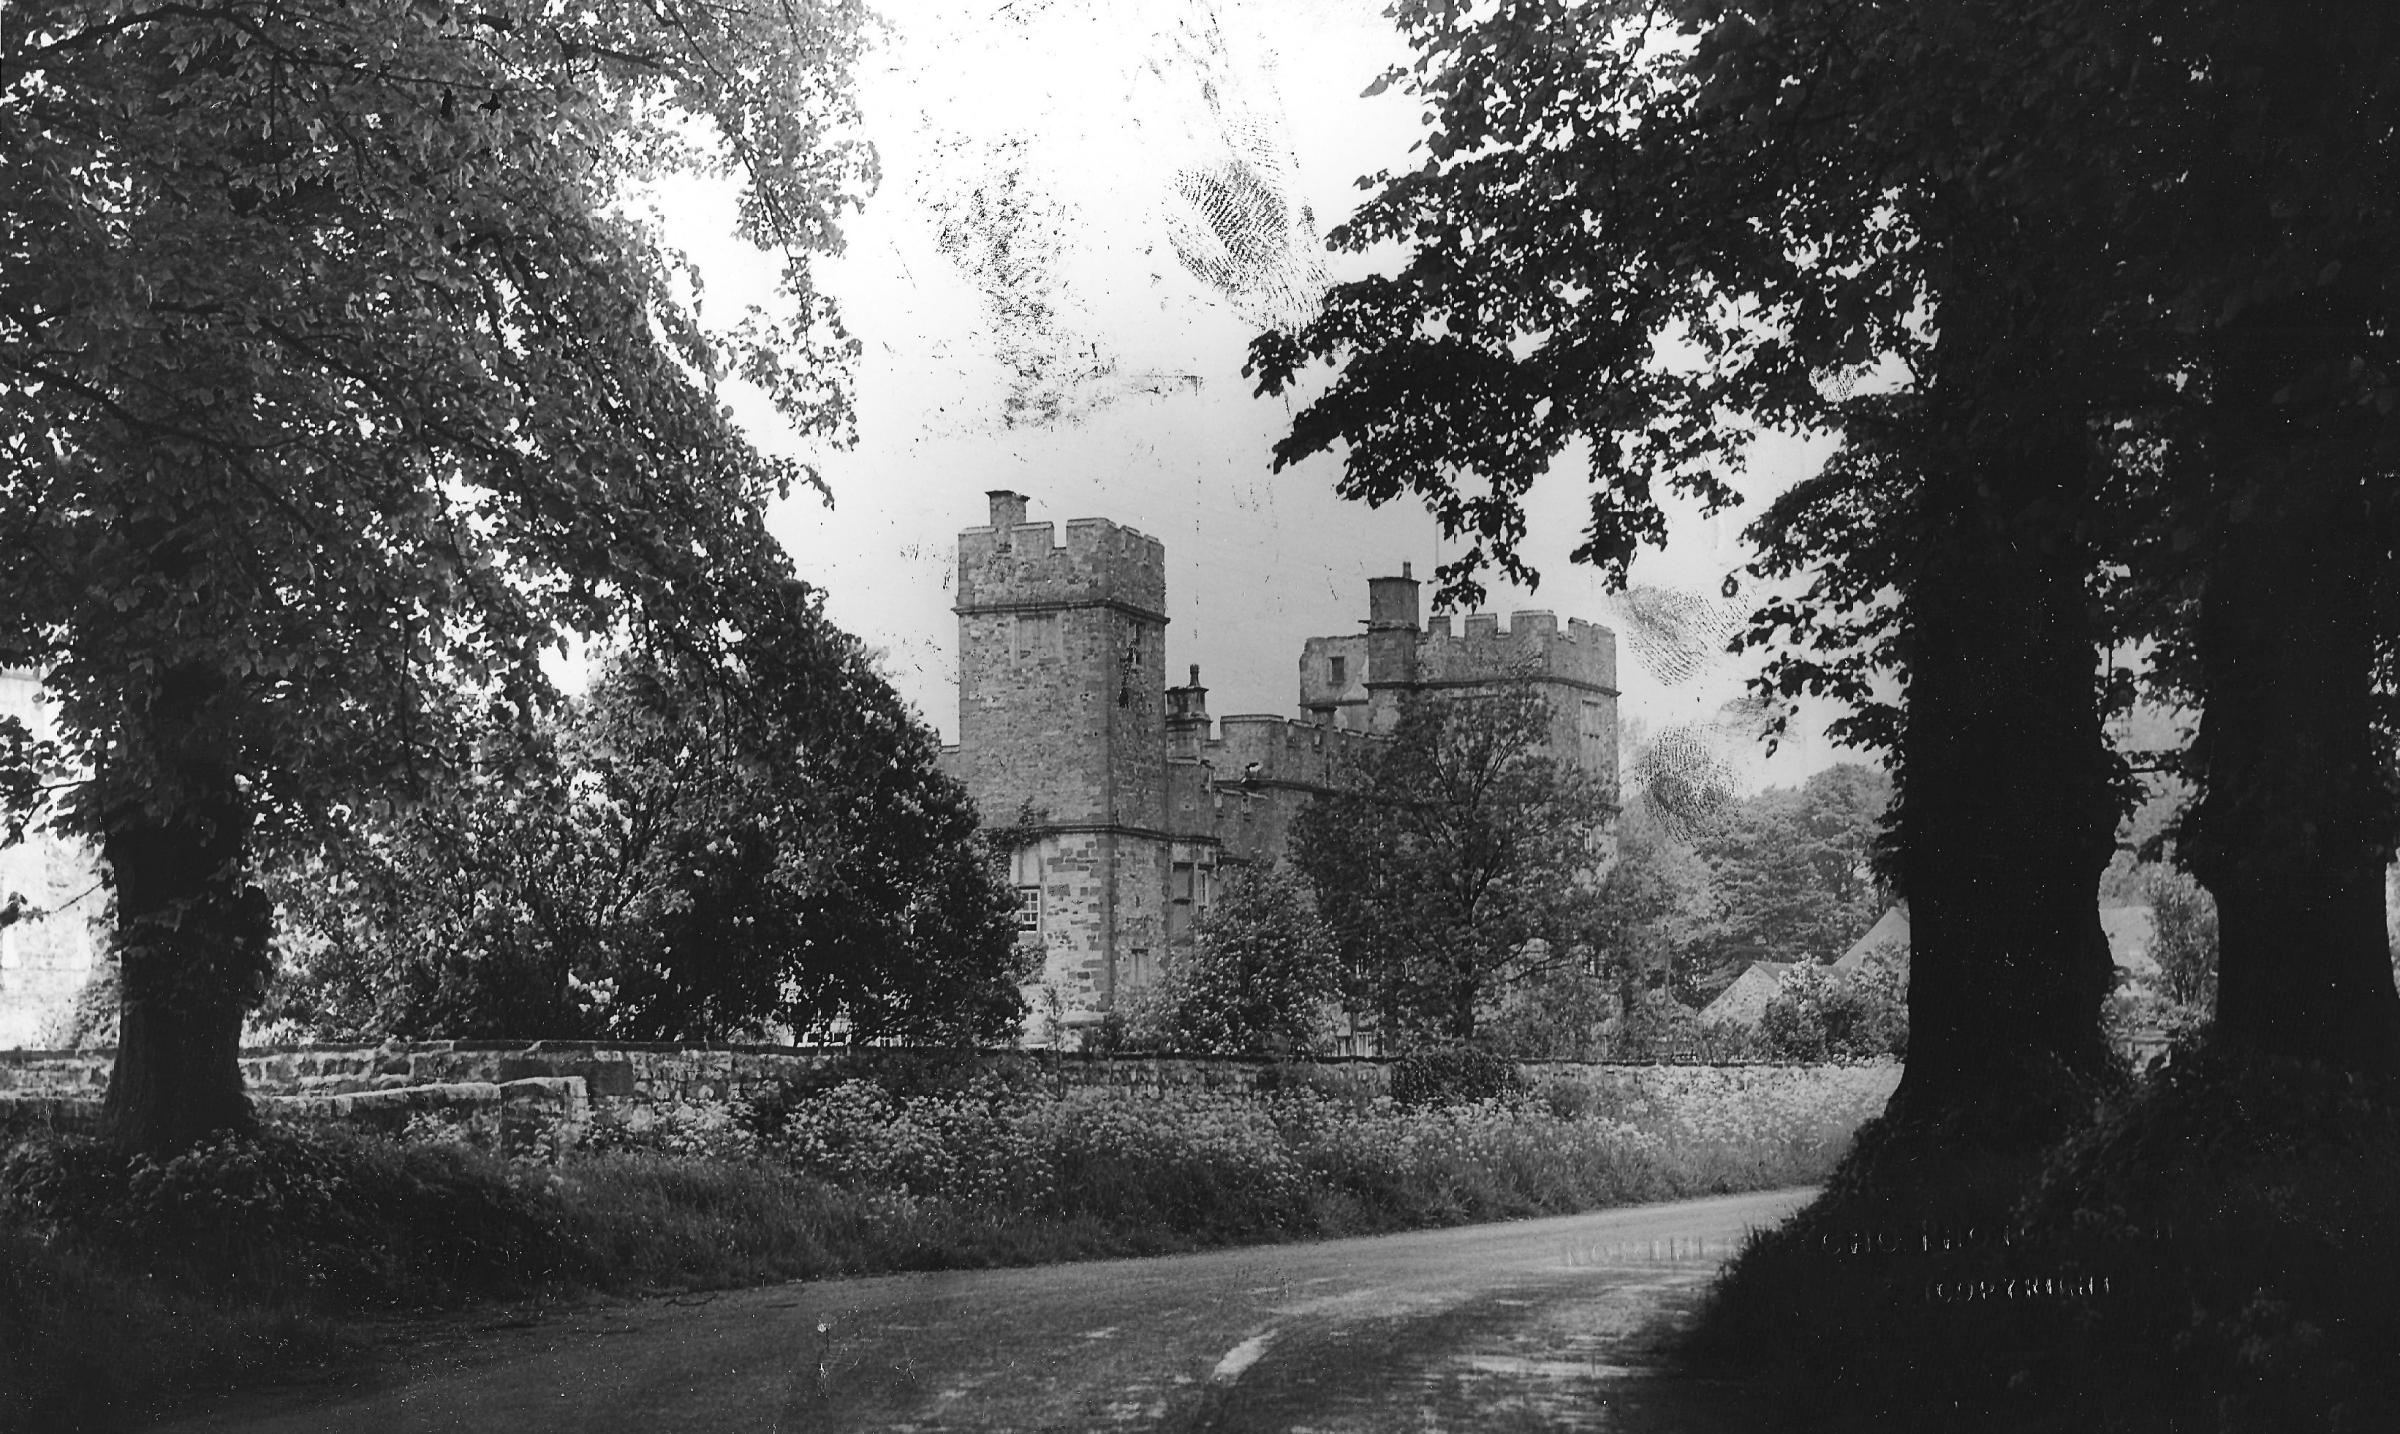 Snape Castle, on June 14, 1958: Catherine Parr was held hostage here in 1537 and was perhaps forced to rely on the dovecote for food